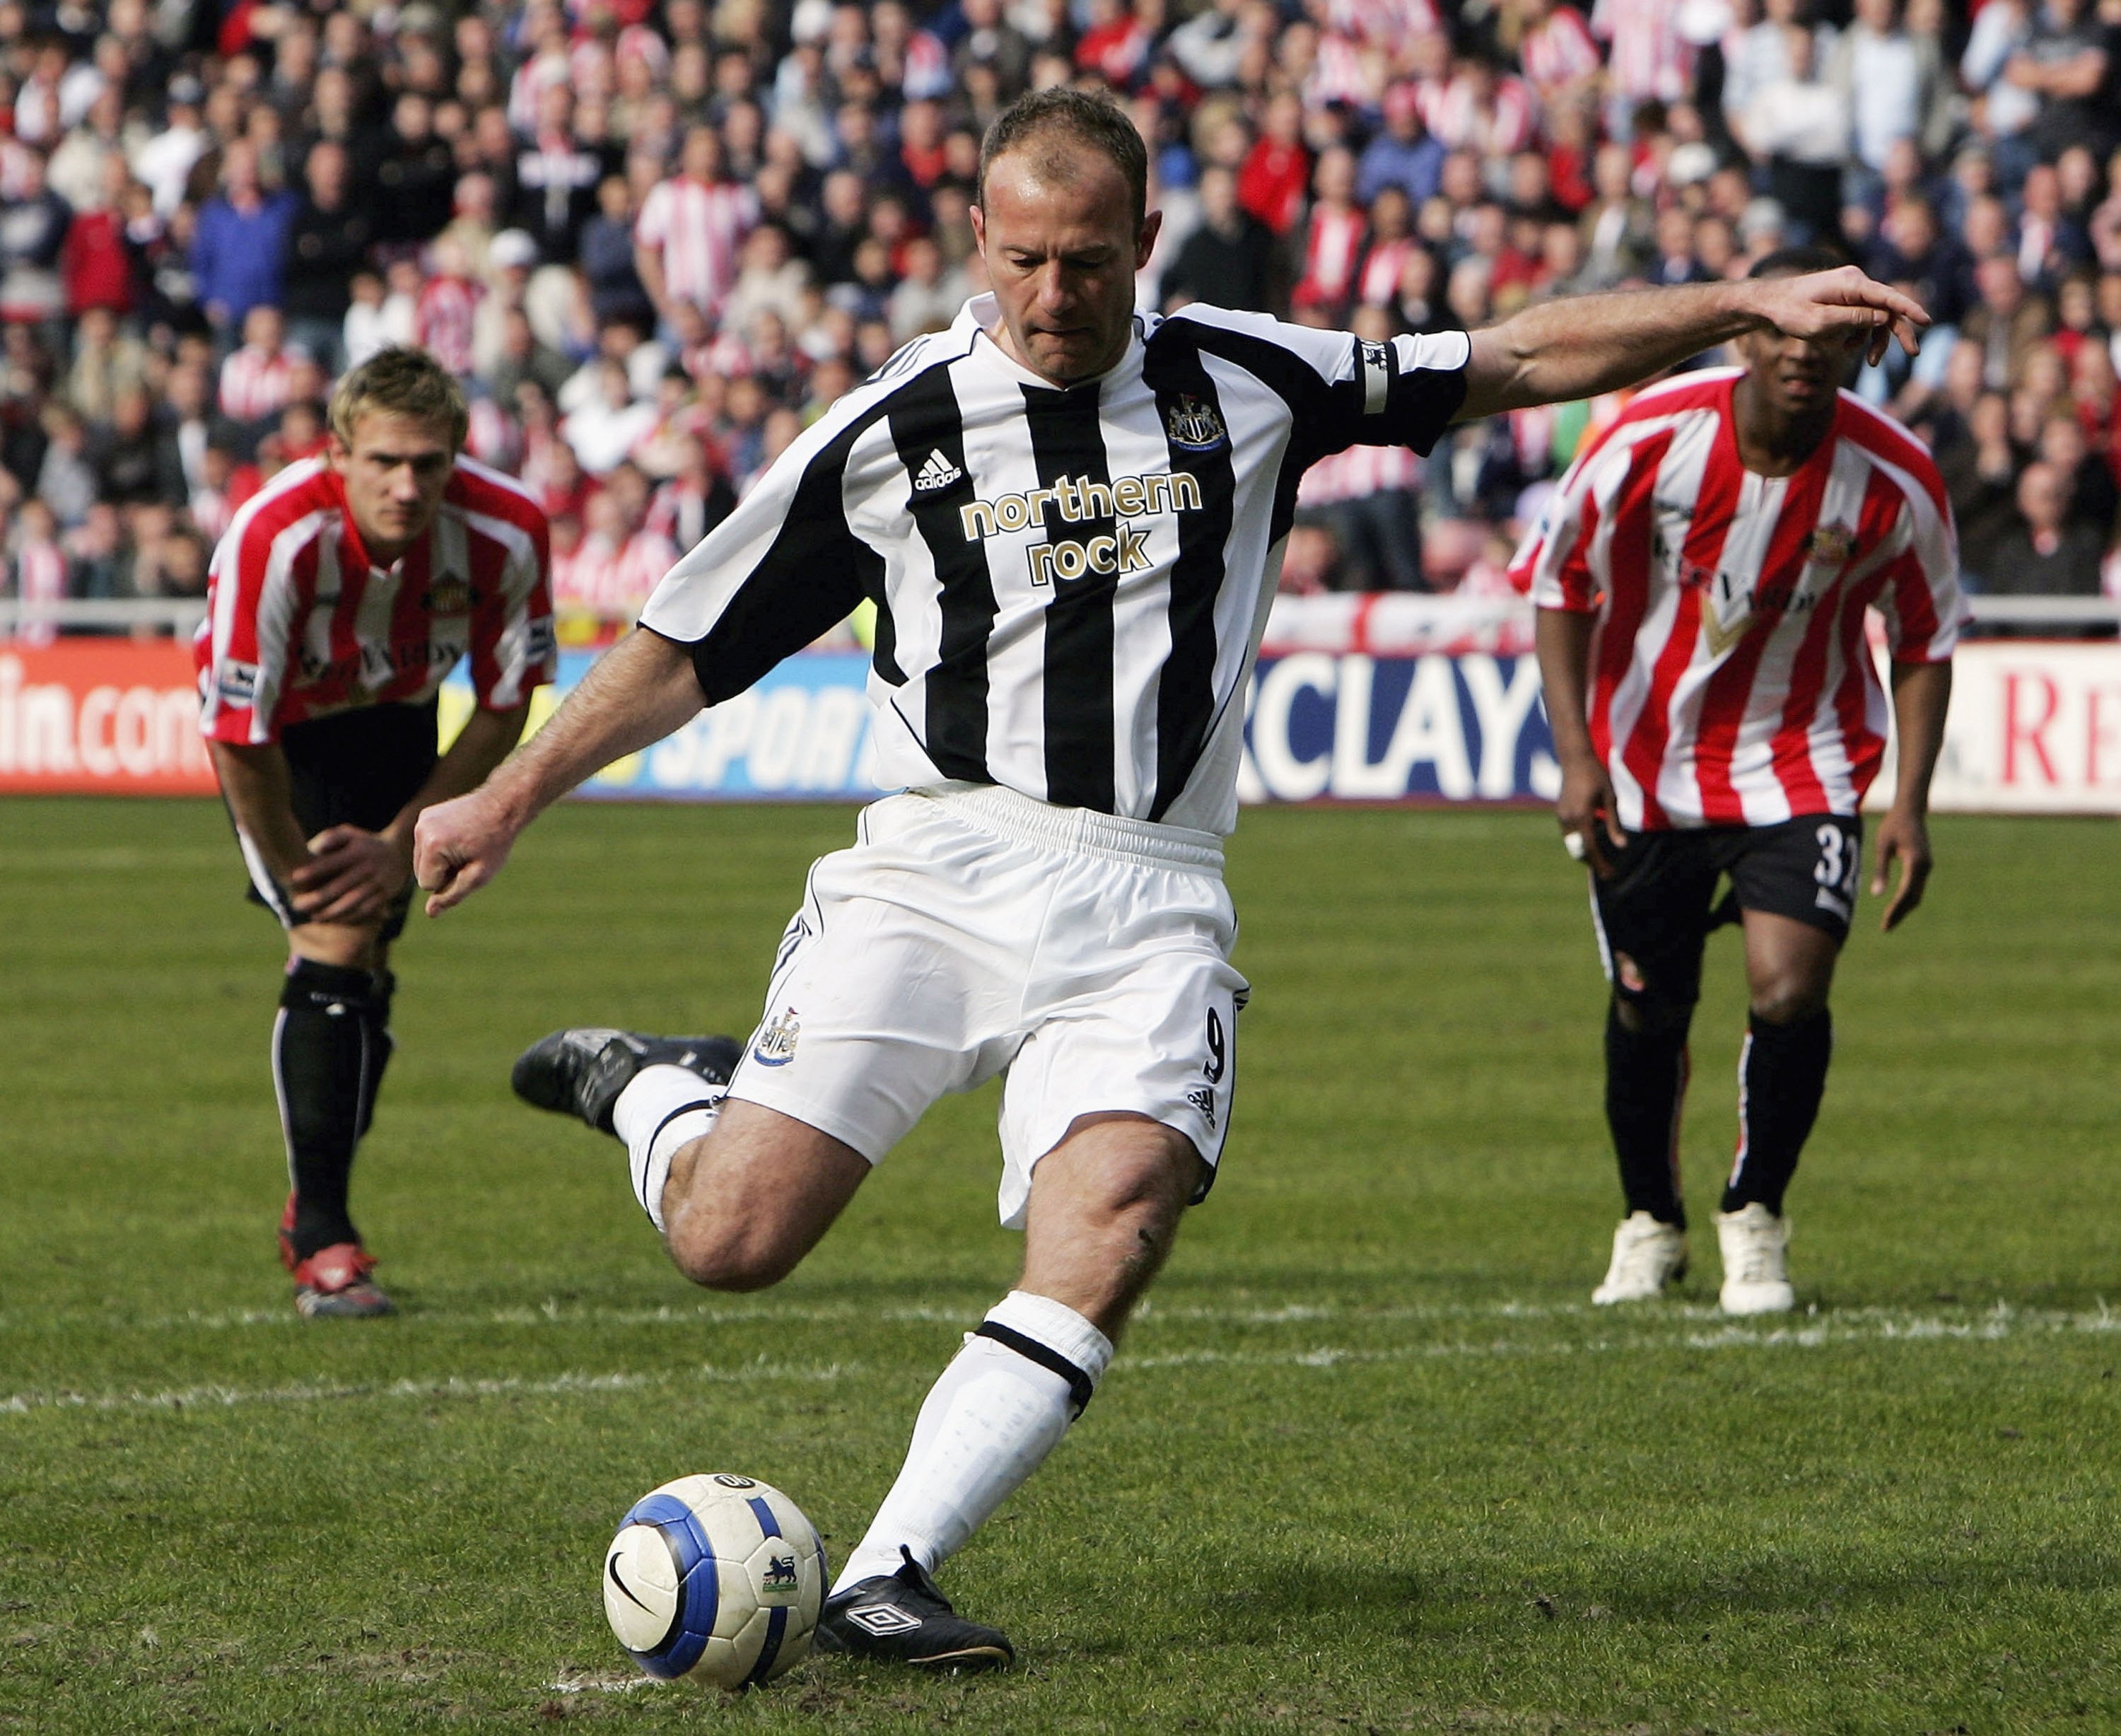 SUNDERLAND, UNITED KINGDOM - APRIL 17:  Newcastle captain Alan Shearer scores the second goal during the Barclays Premiership match between Sunderland and Newcastle United at The Stadium of Light on April 17 2006 in Sunderland, England  (Photo by Stu Fors